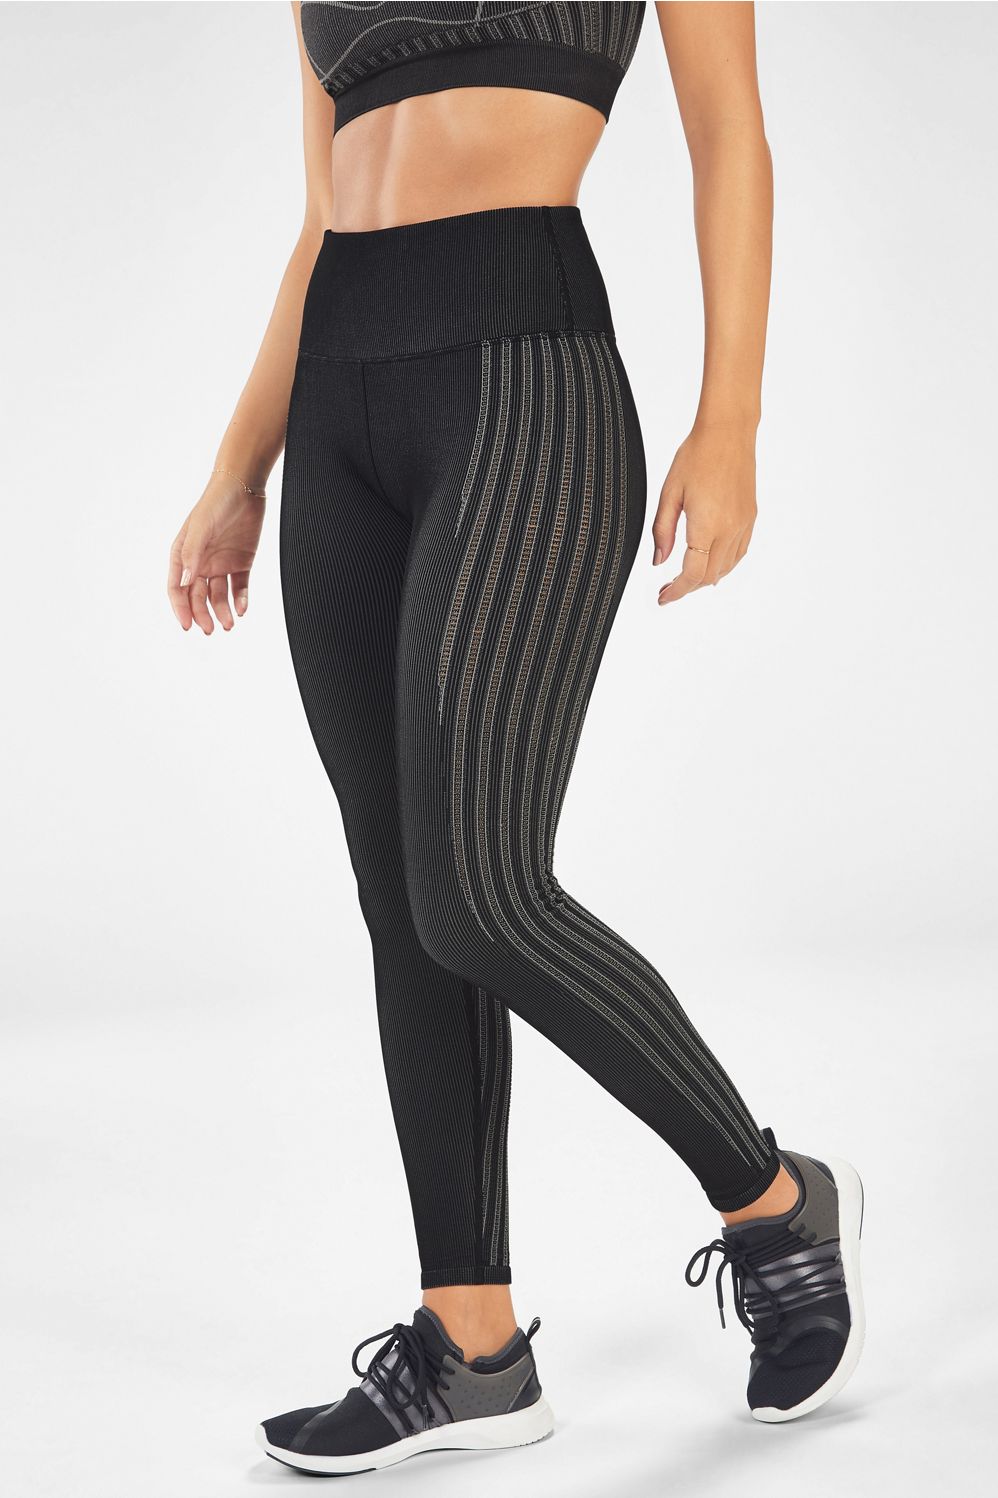 Fablectic NWT high waisted seamless leggings